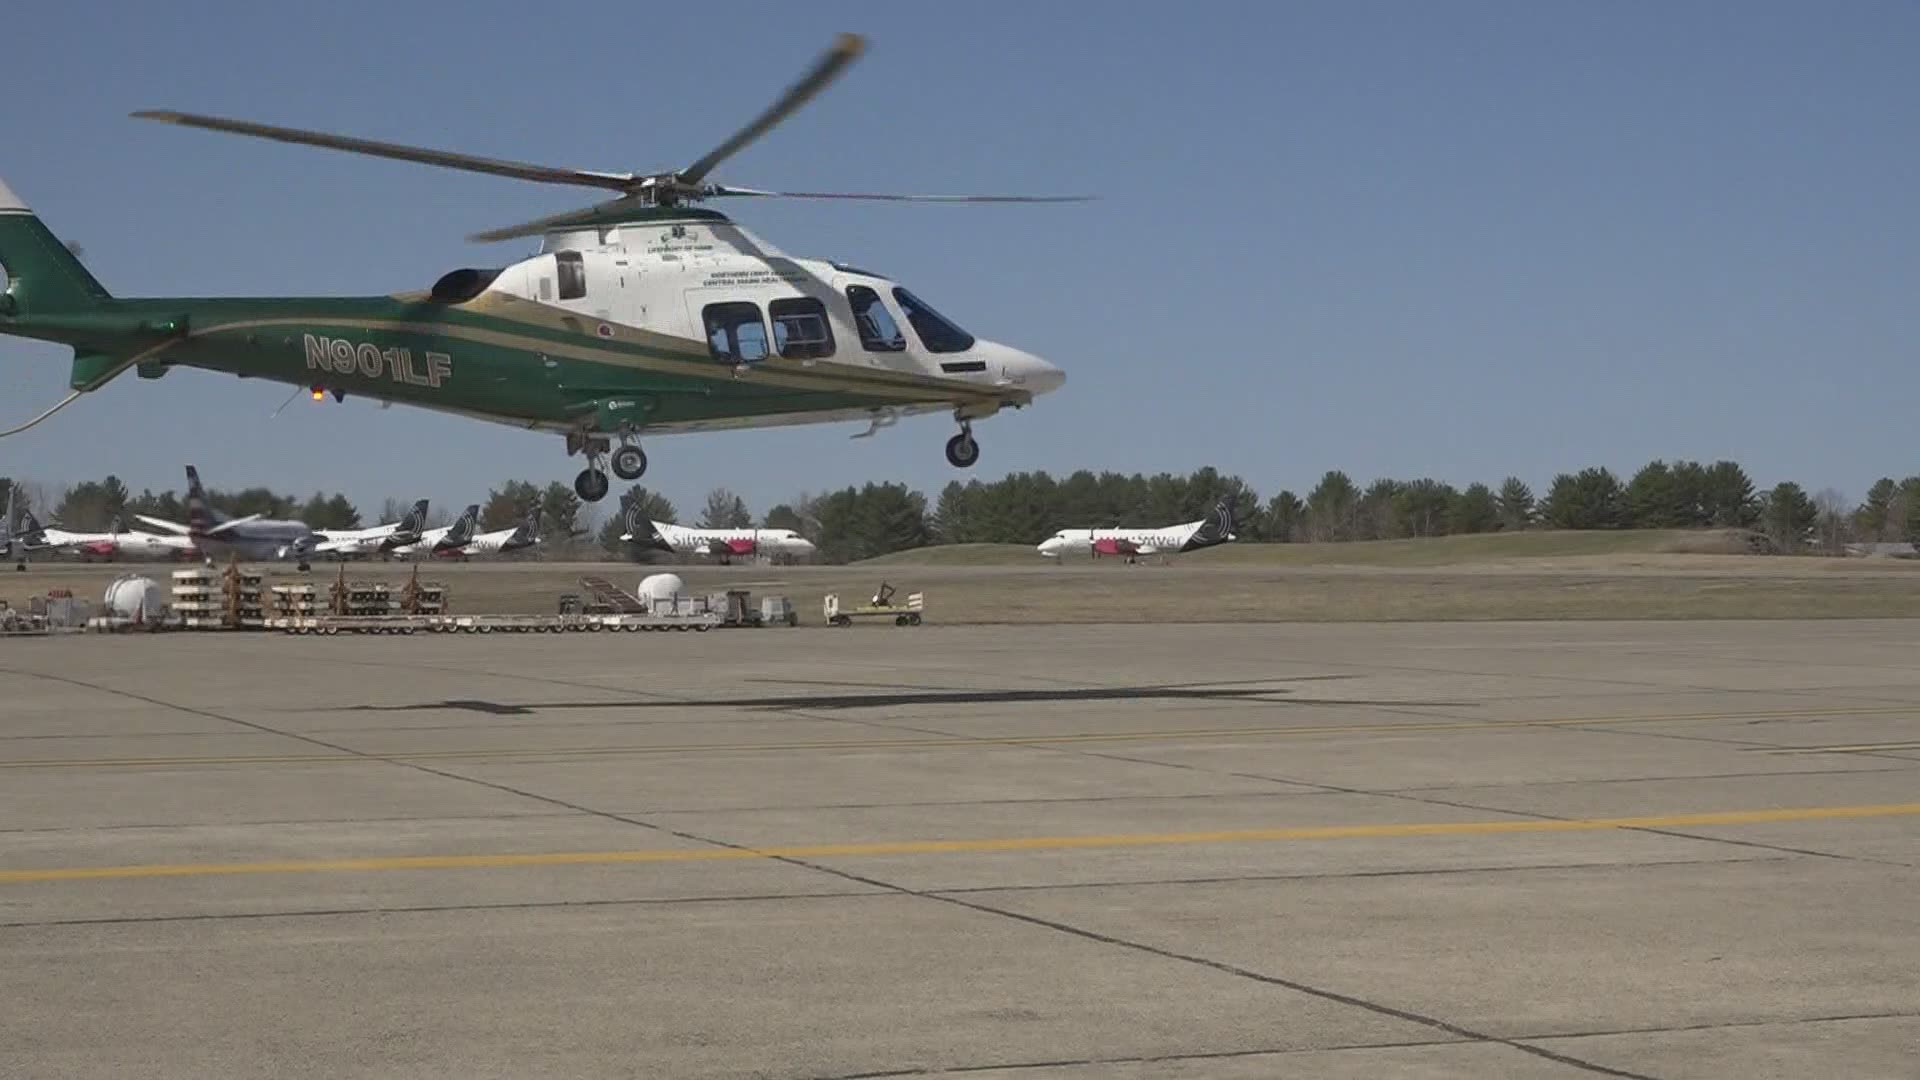 These medical helicopters include some of the most advanced aviation technologies. One is now stationed in Bangor and the other in Lewiston.